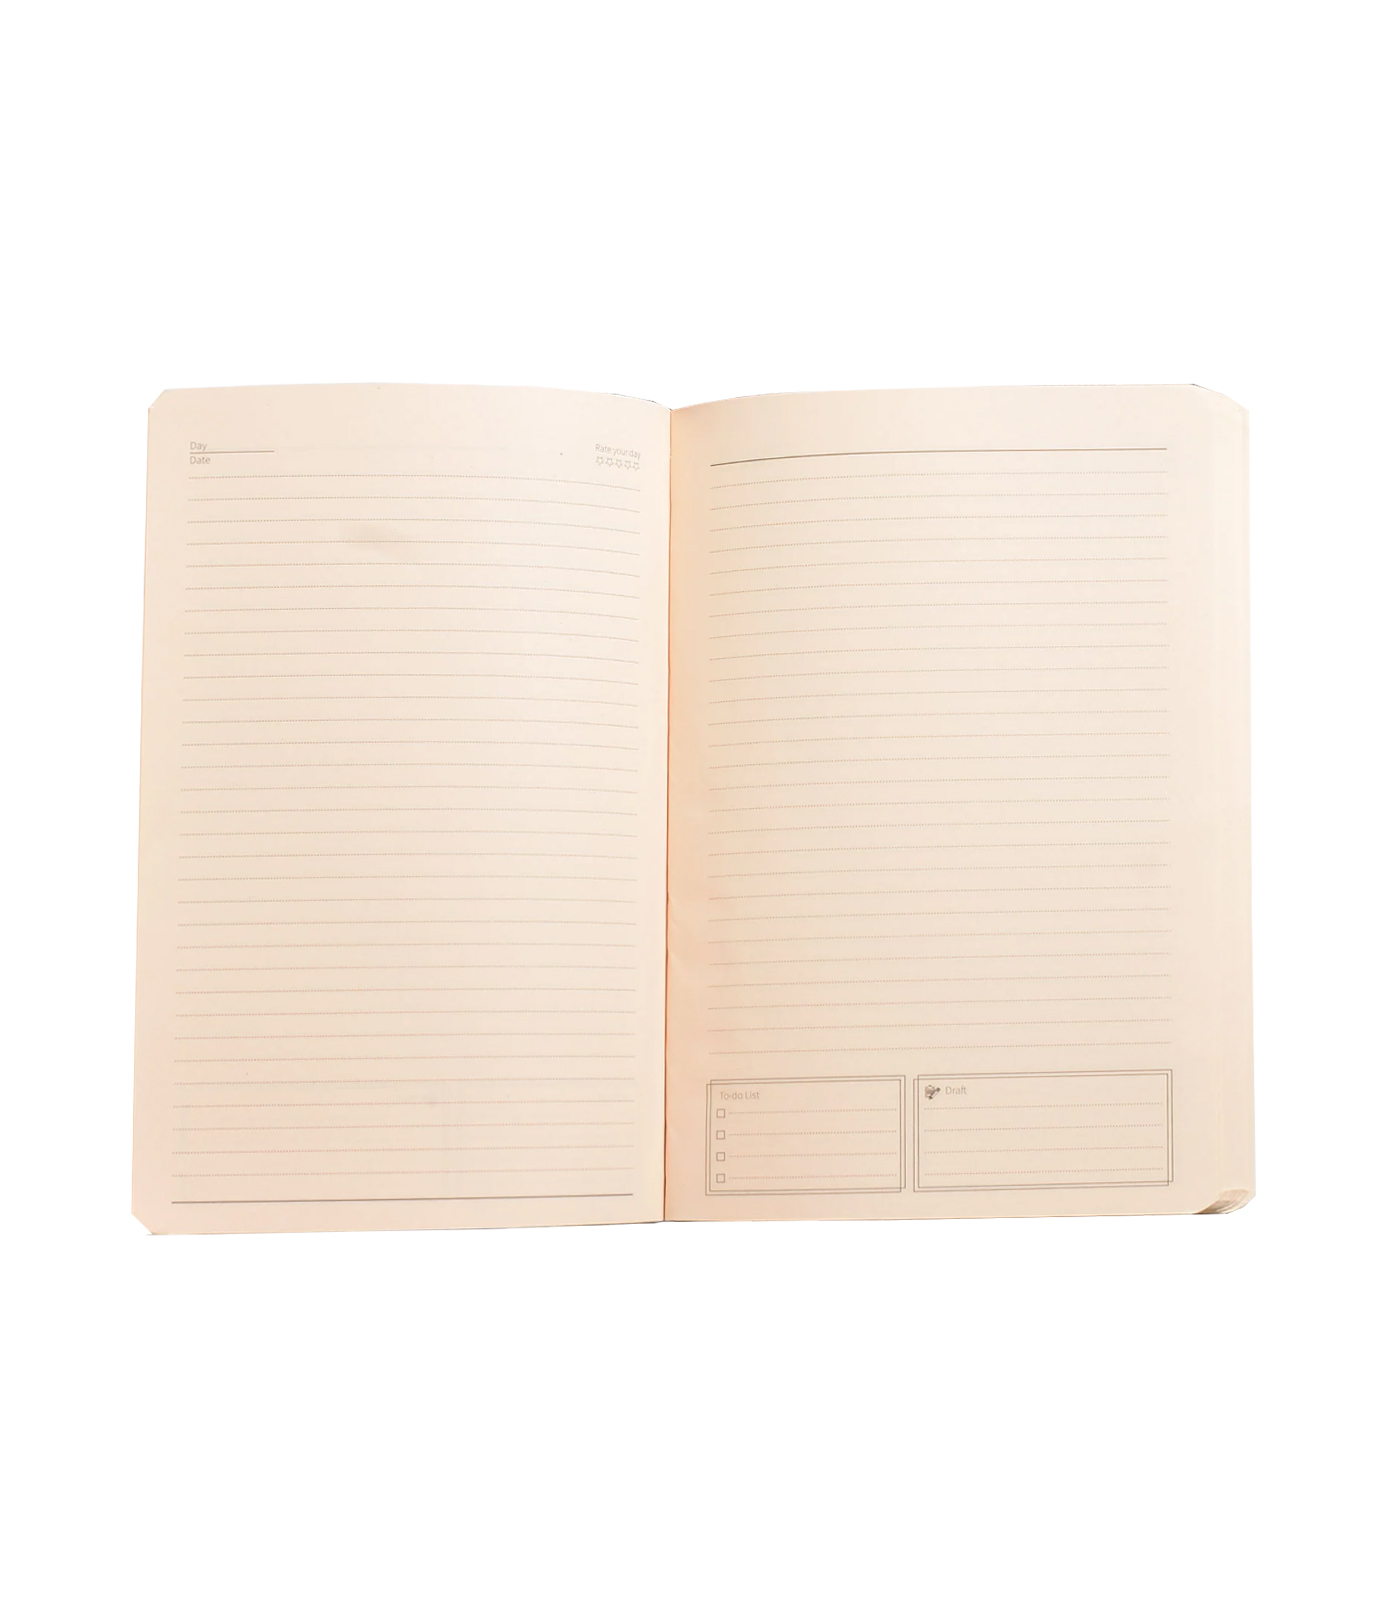 Atom Notebook Leather Cover - NB20